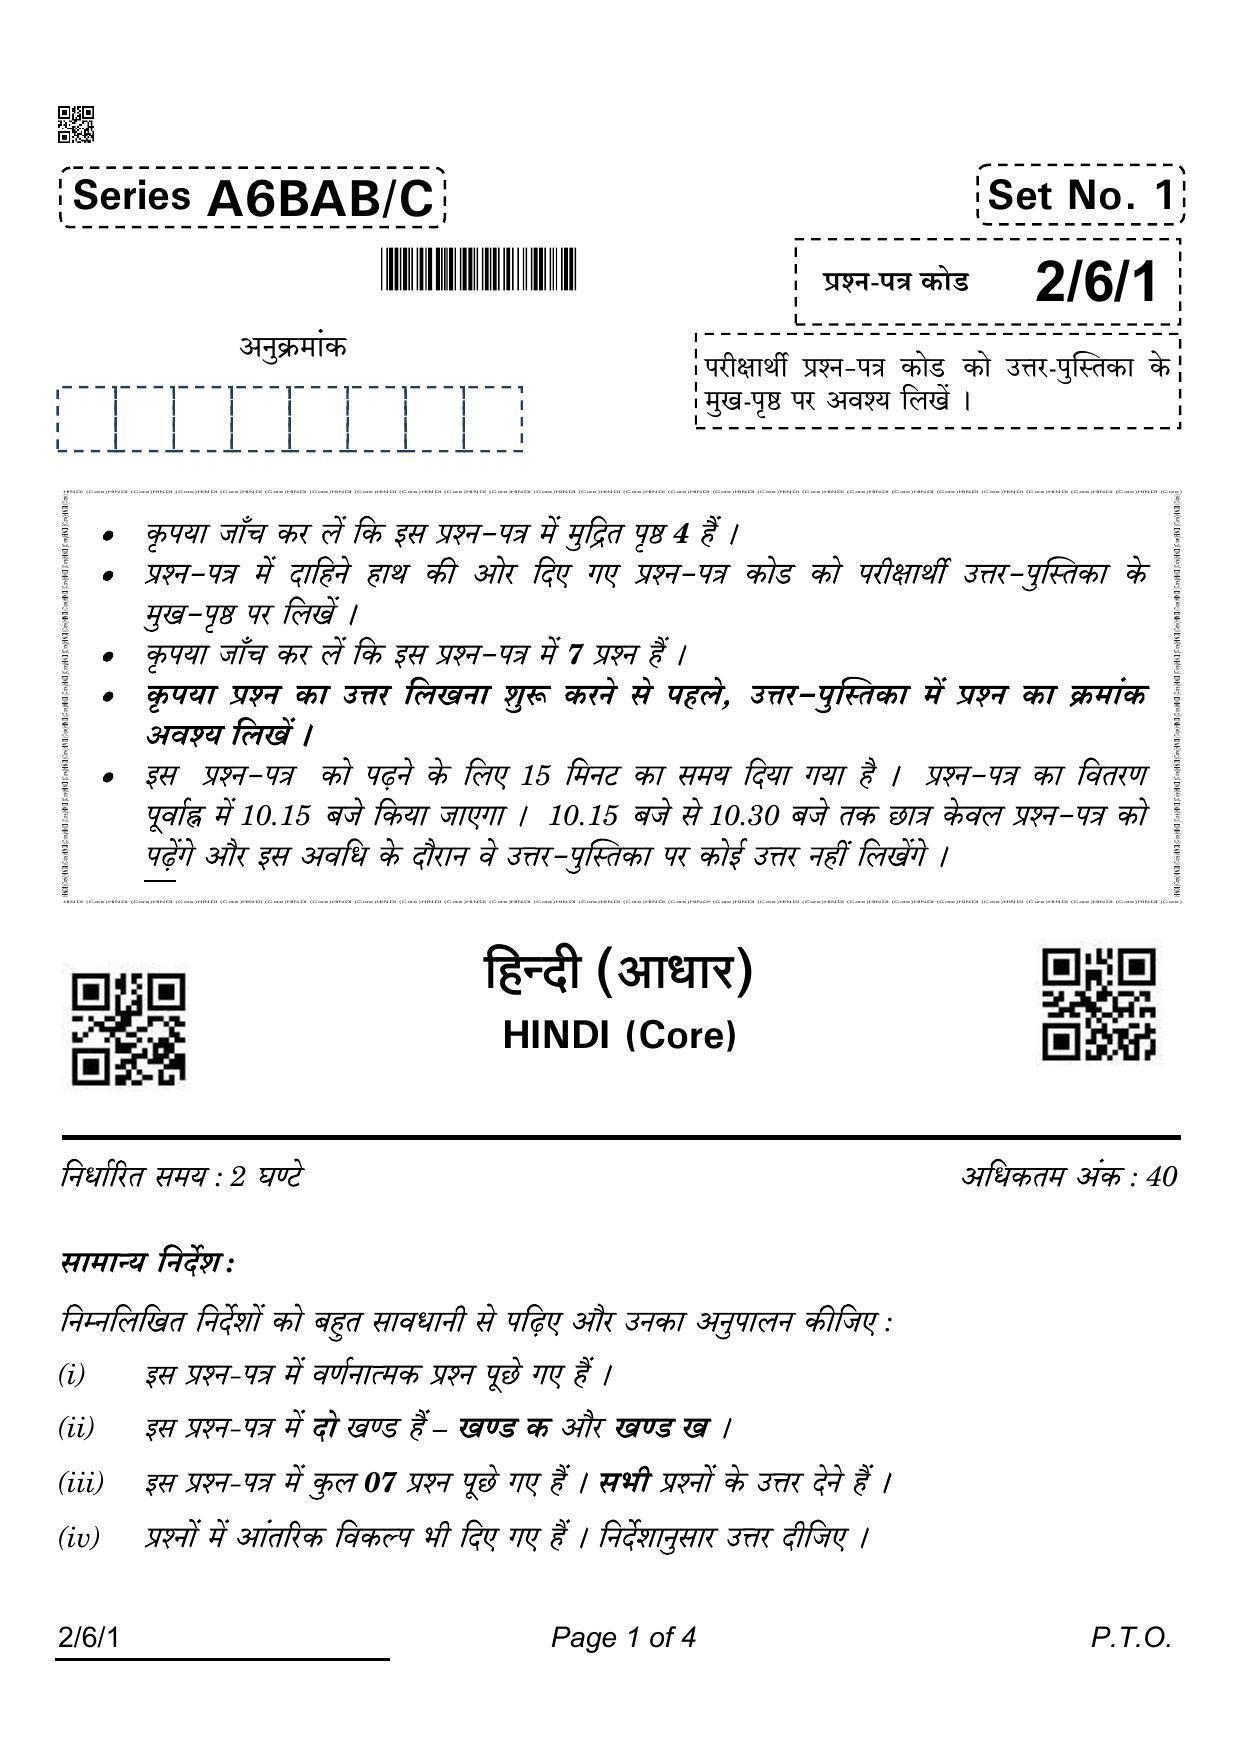 CBSE Class 12 2-6-1 Hindi Core 2022 Compartment Question Paper - Page 1